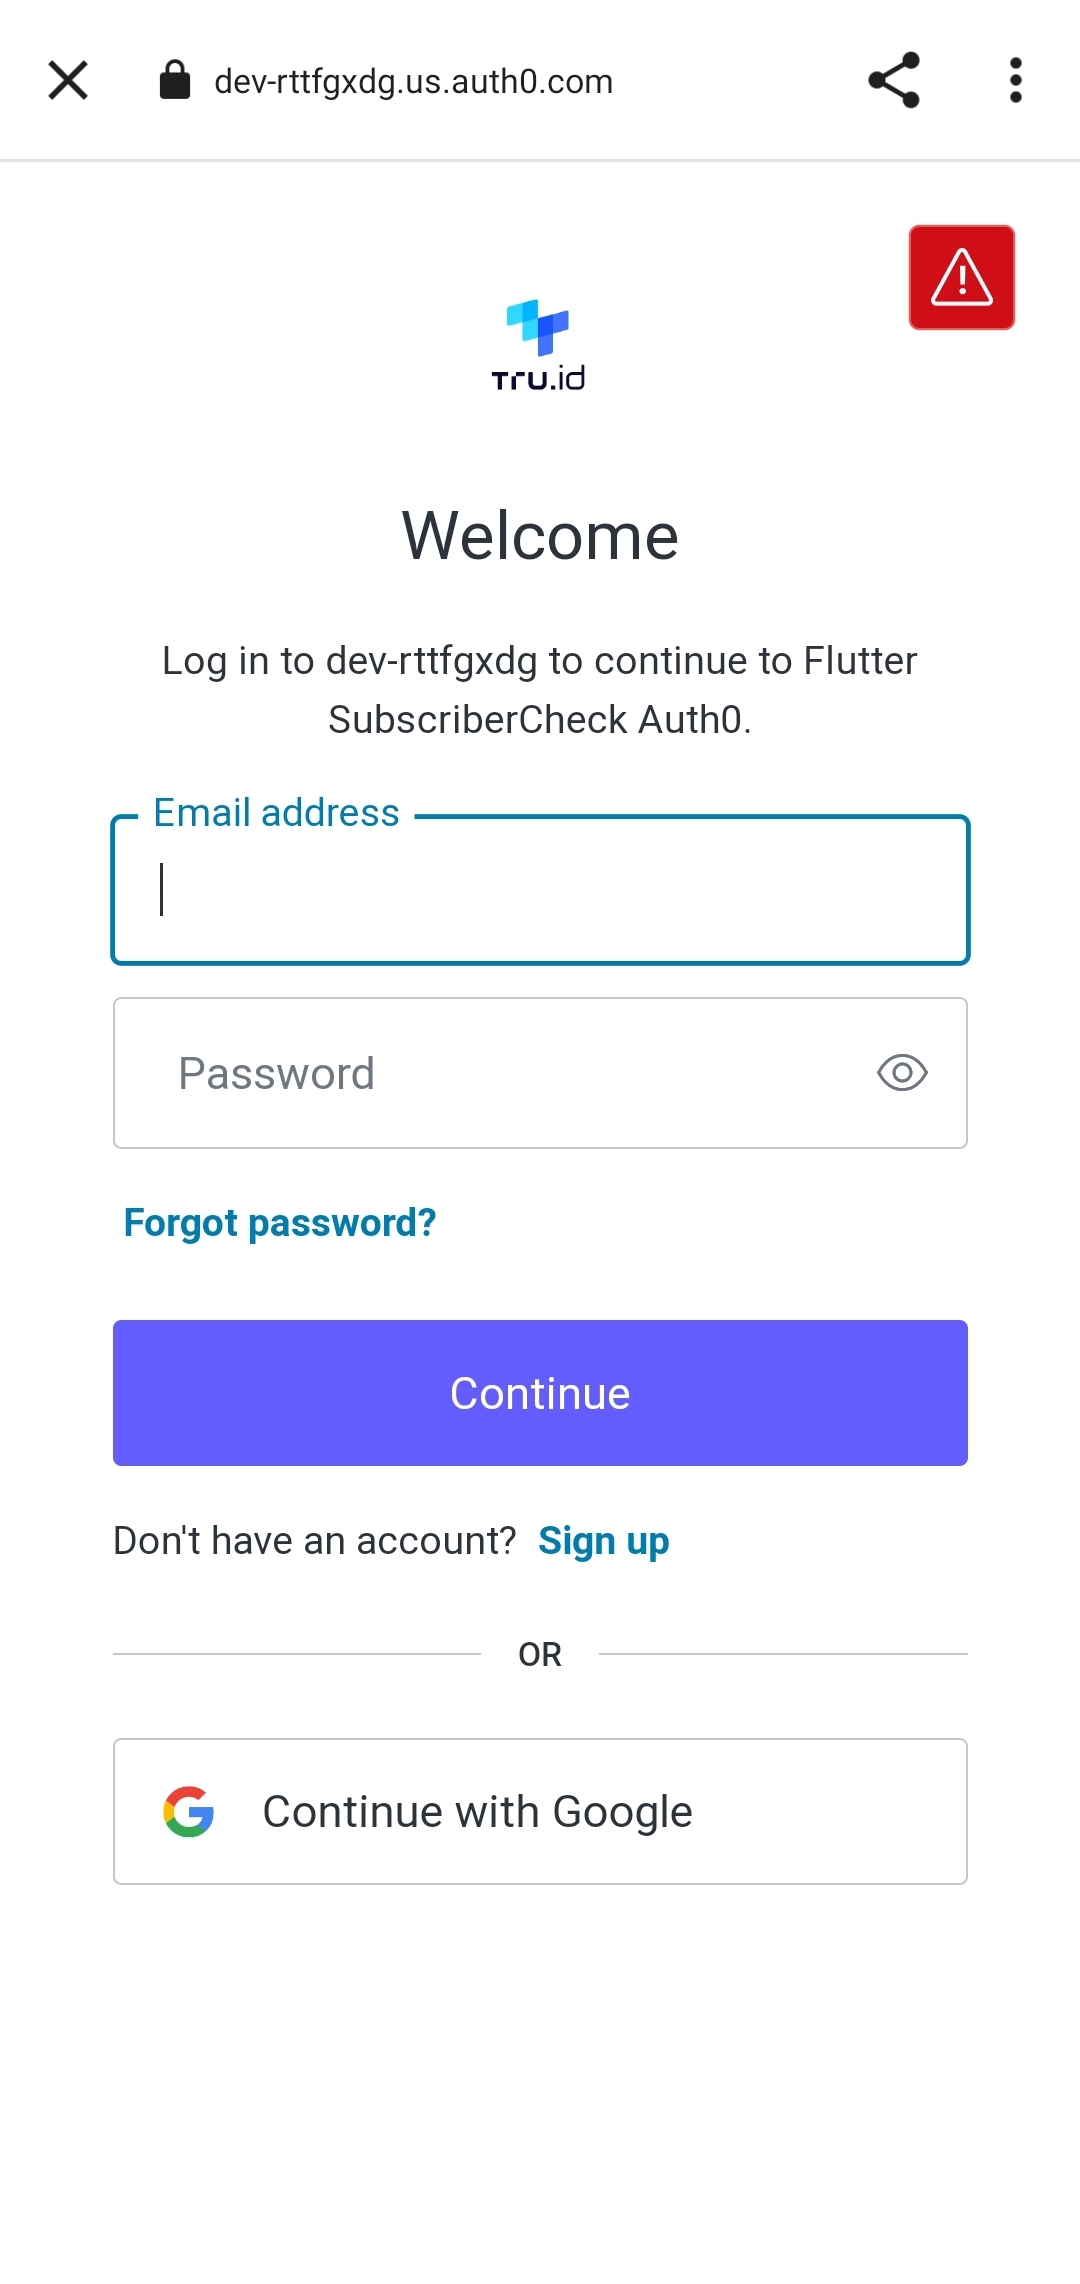 A screenshot of a mobile device having been navigated to the Auth0 universal login page. This page contains the tru.ID logo and a Welcome label, followed by text reading 'Log in to <app name> to continue to Flutter SubscriberCheck Auth0.' Below this are two input fields, an email address and password field, followed by a Continue button.